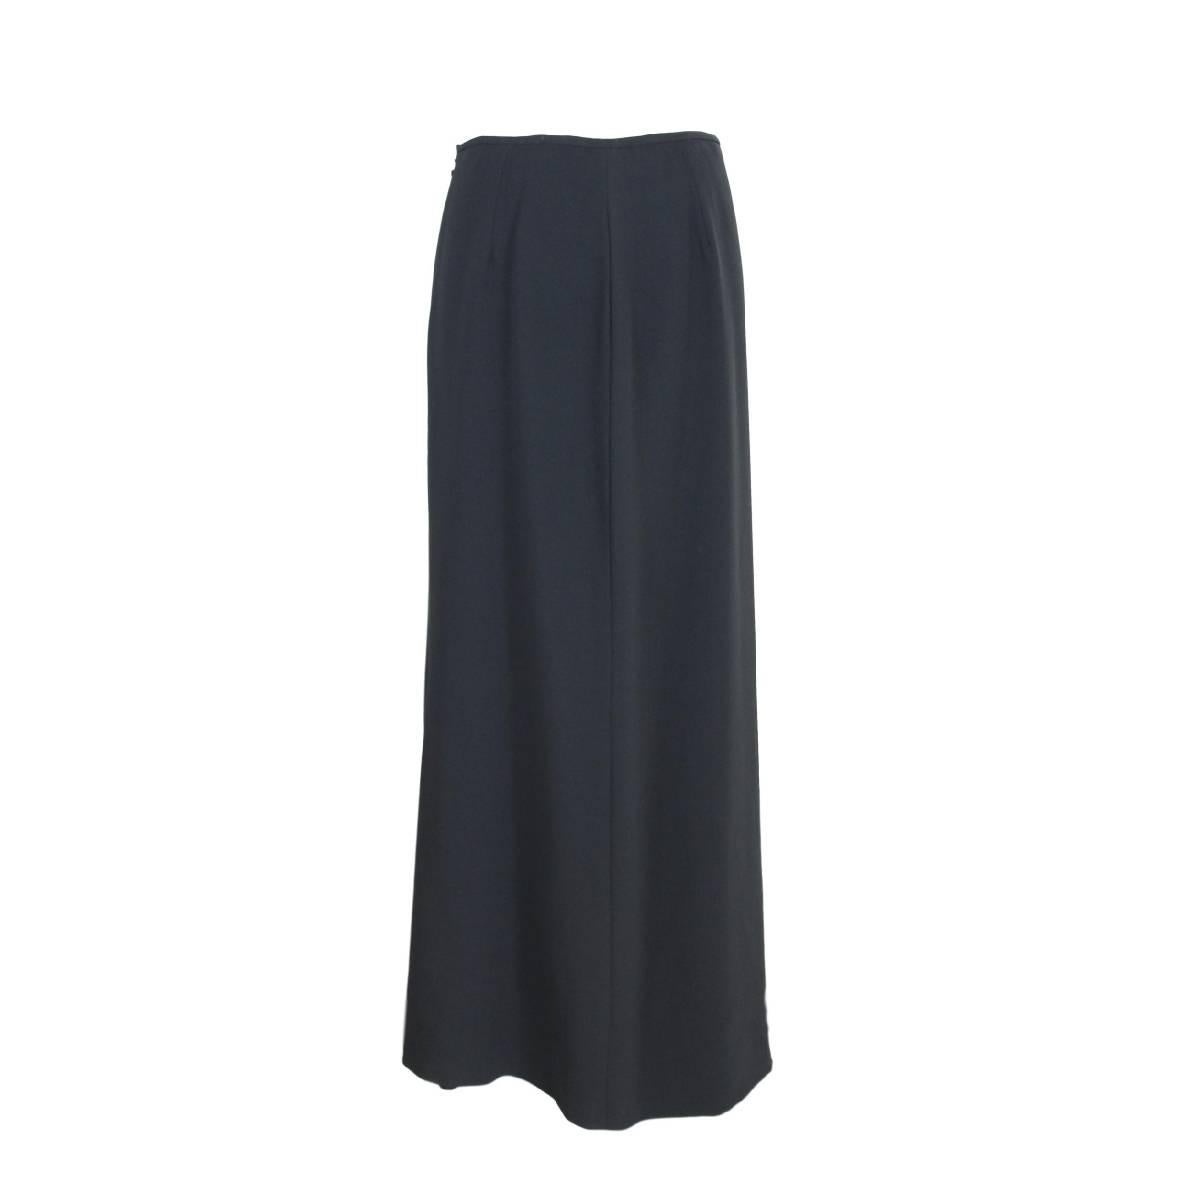 Valentino Asimmetrycal Black Acetate Italian Skirt, 1990s In New Condition For Sale In Brindisi, IT